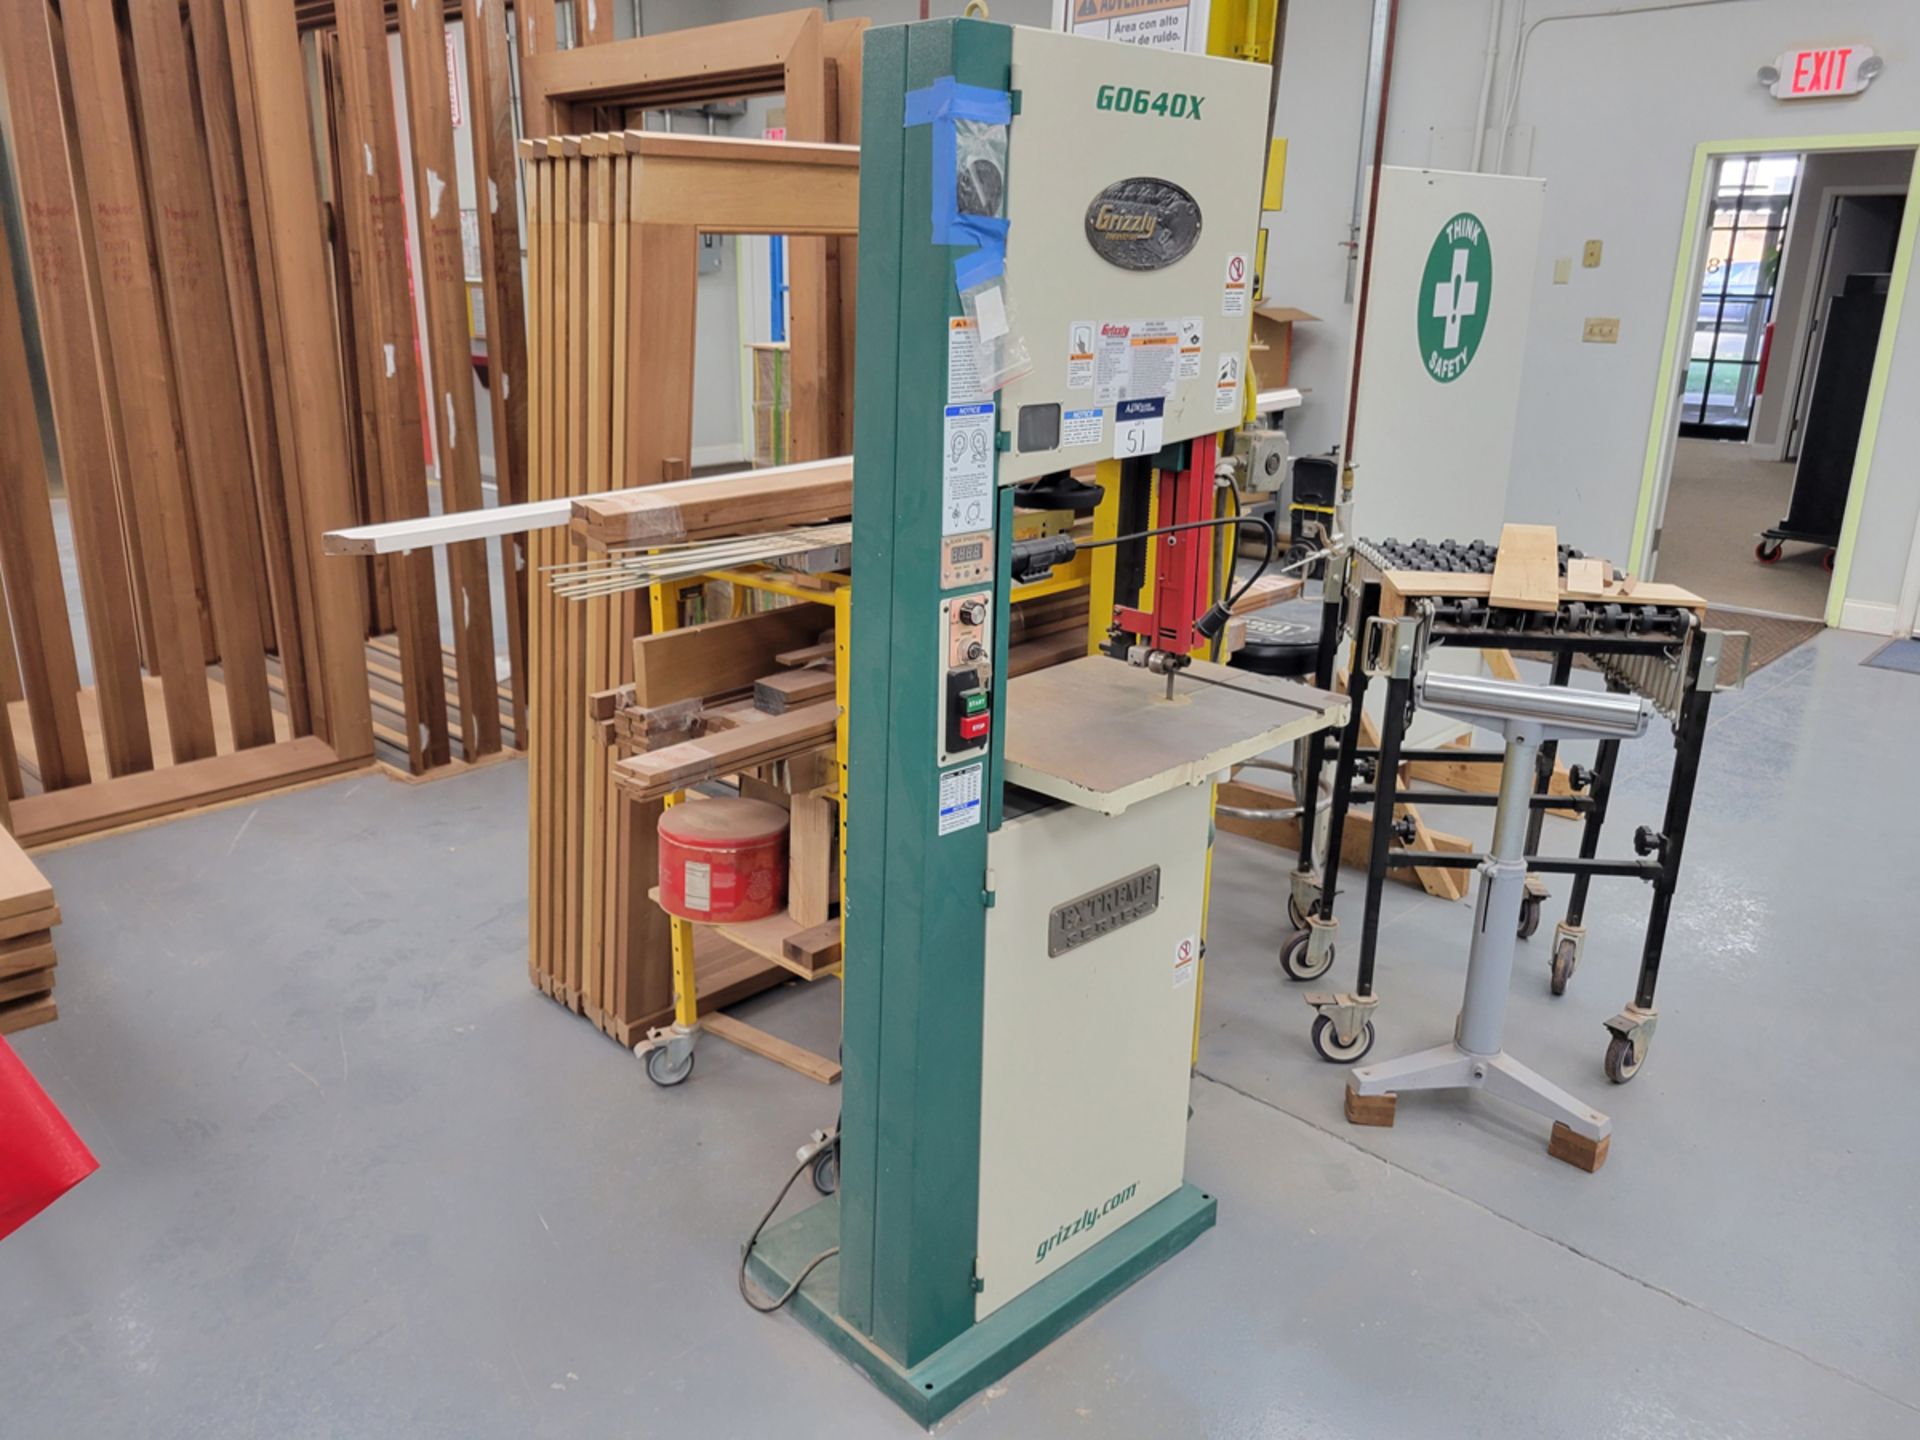 Grizzly Industrial Model: G0640X 17" Variable Speed Wood/Metal Cutting Bandsaw - Image 2 of 11